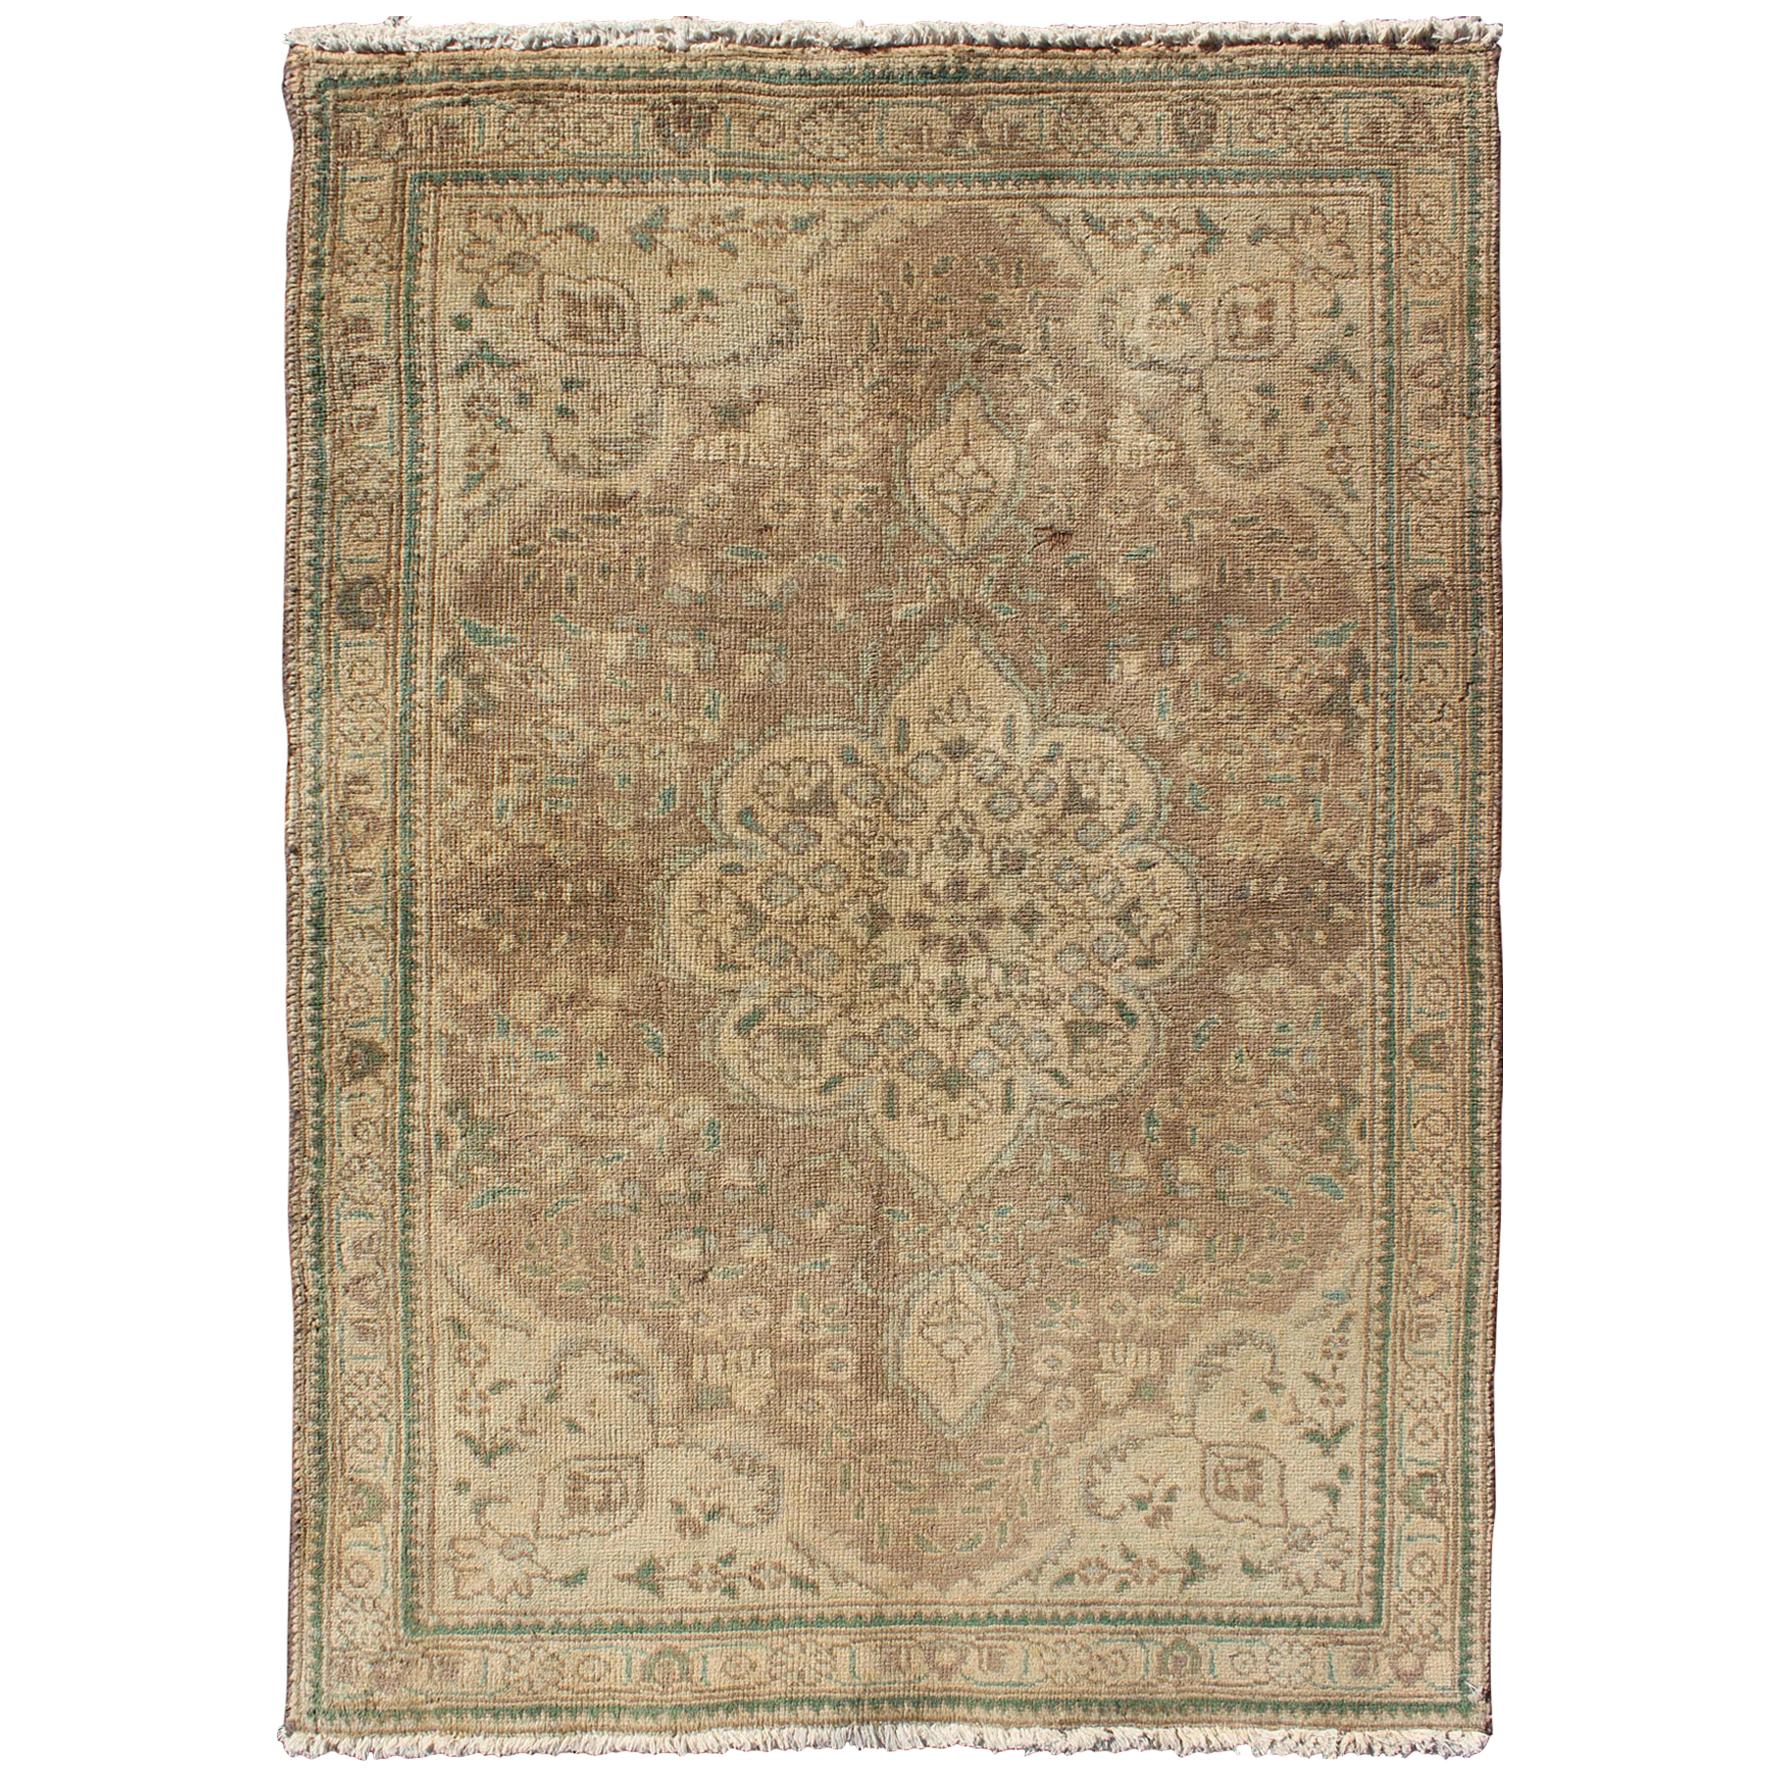 Earth Tone Vintage Persian Tabriz Rug with Swirling Garden Pattern and Medallion